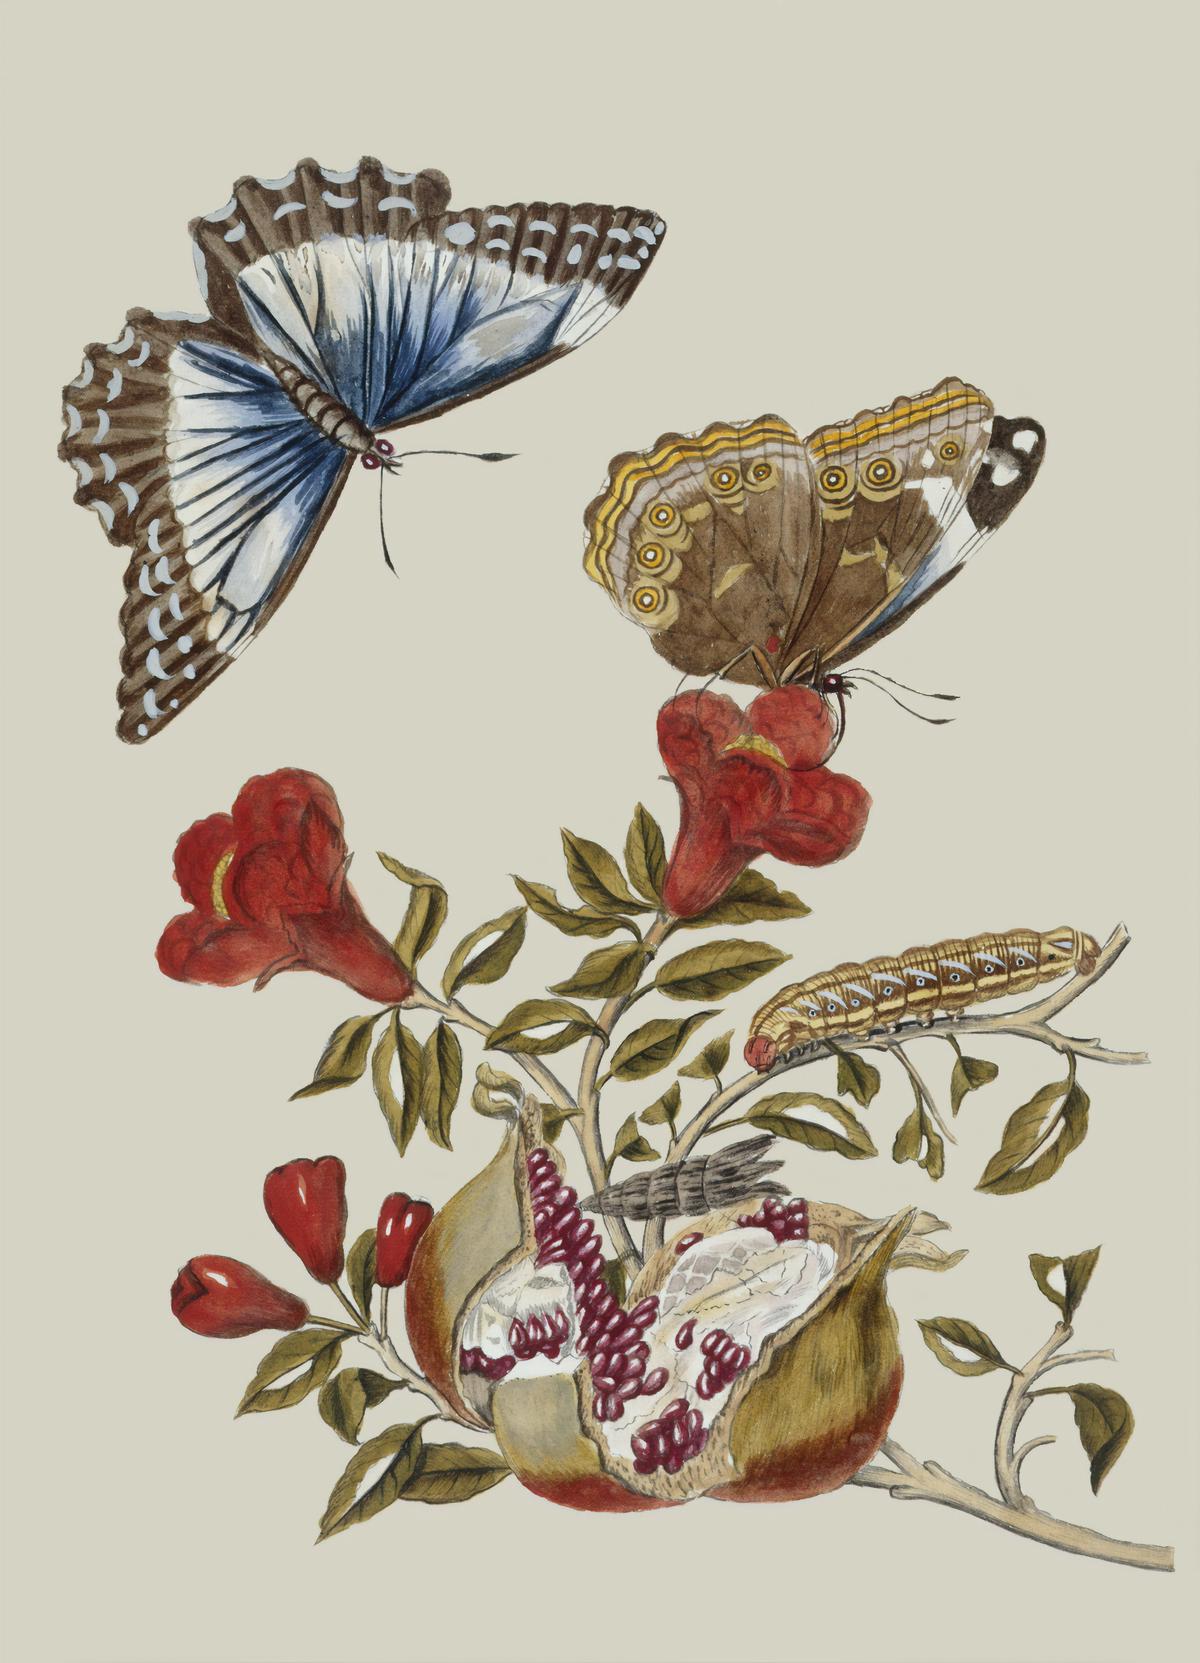 Illustration depicting various moth species symbolizing different concepts described in the text